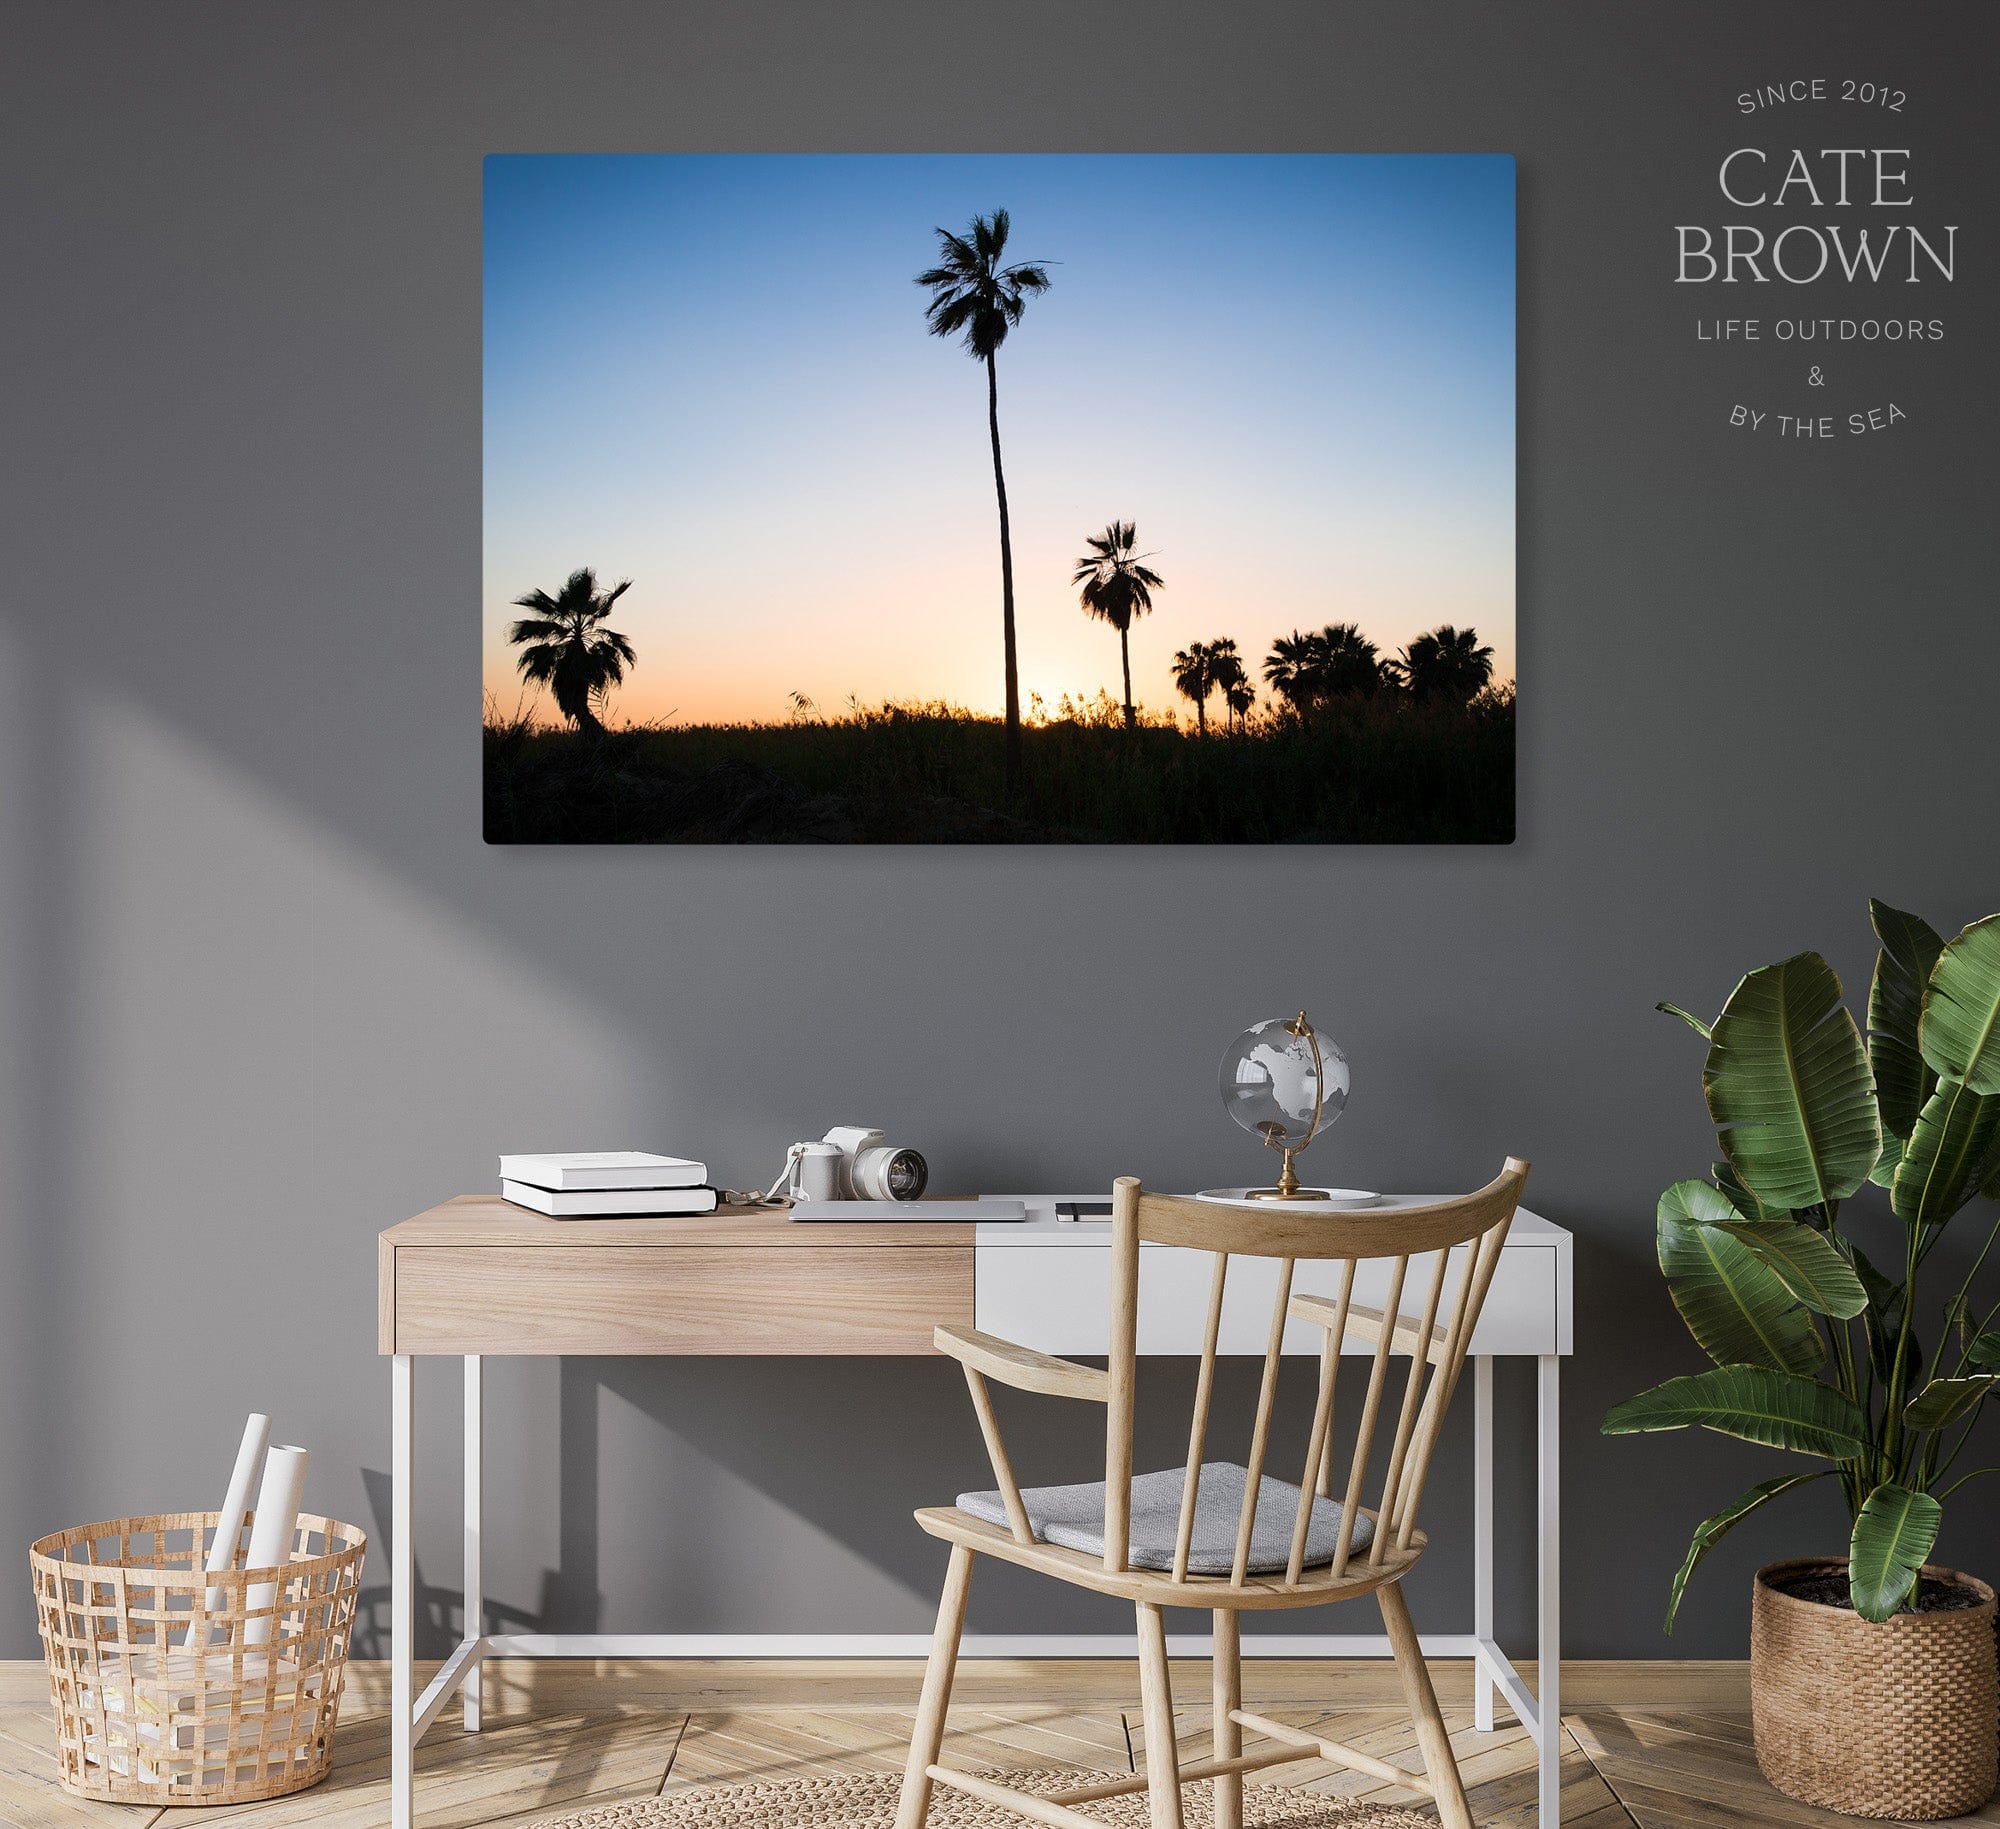 Cate Brown Photo Canvas / 27"x40" / Float Frame Baja Palms #1  //  Landscape Photography Made to Order Ocean Fine Art